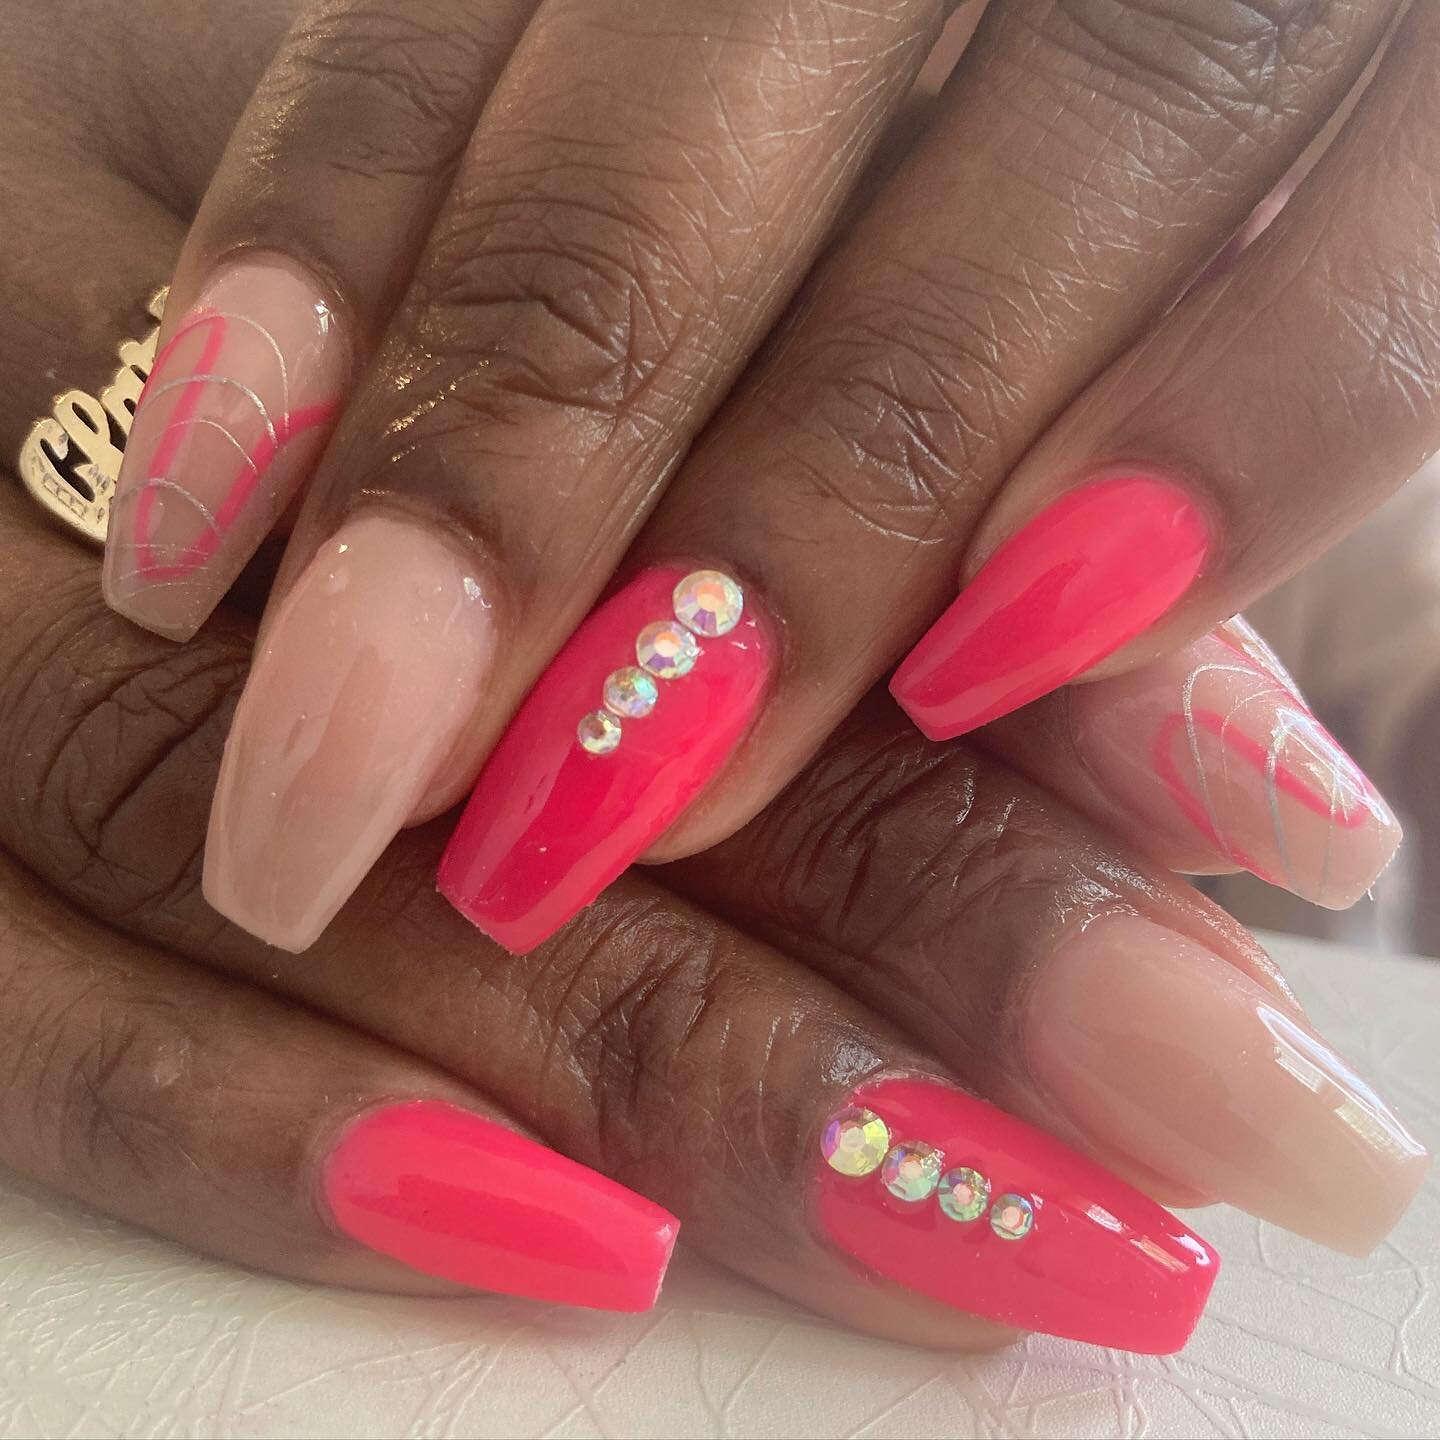 Nude with a touch of pink. 

🚨A few appointments available on Thursday. 
Get your requests in early this month. 
I&rsquo;ll be out of town twice in May. 
Book online or text. 🚨

#polygelnails #polygel #nudenails #blacknailtech #nails #nailart #nail